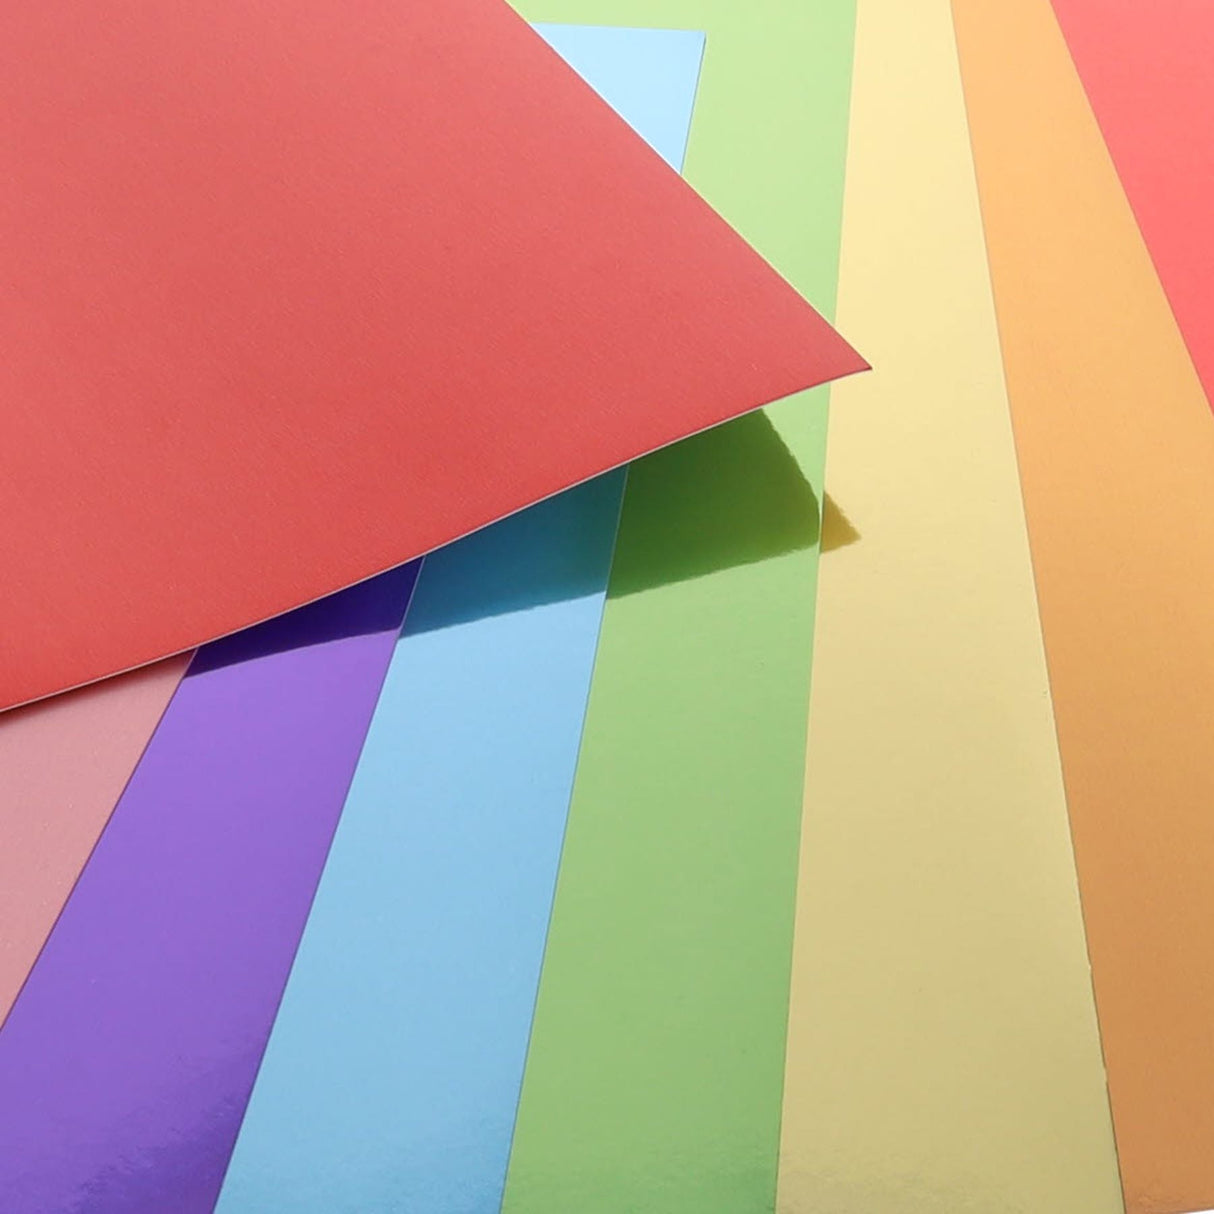 Premier Activity A4 Foil Card - 16 Sheets - 220gsm - Shades Of The Rainbow-Craft Paper & Card-Premier|StationeryShop.co.uk